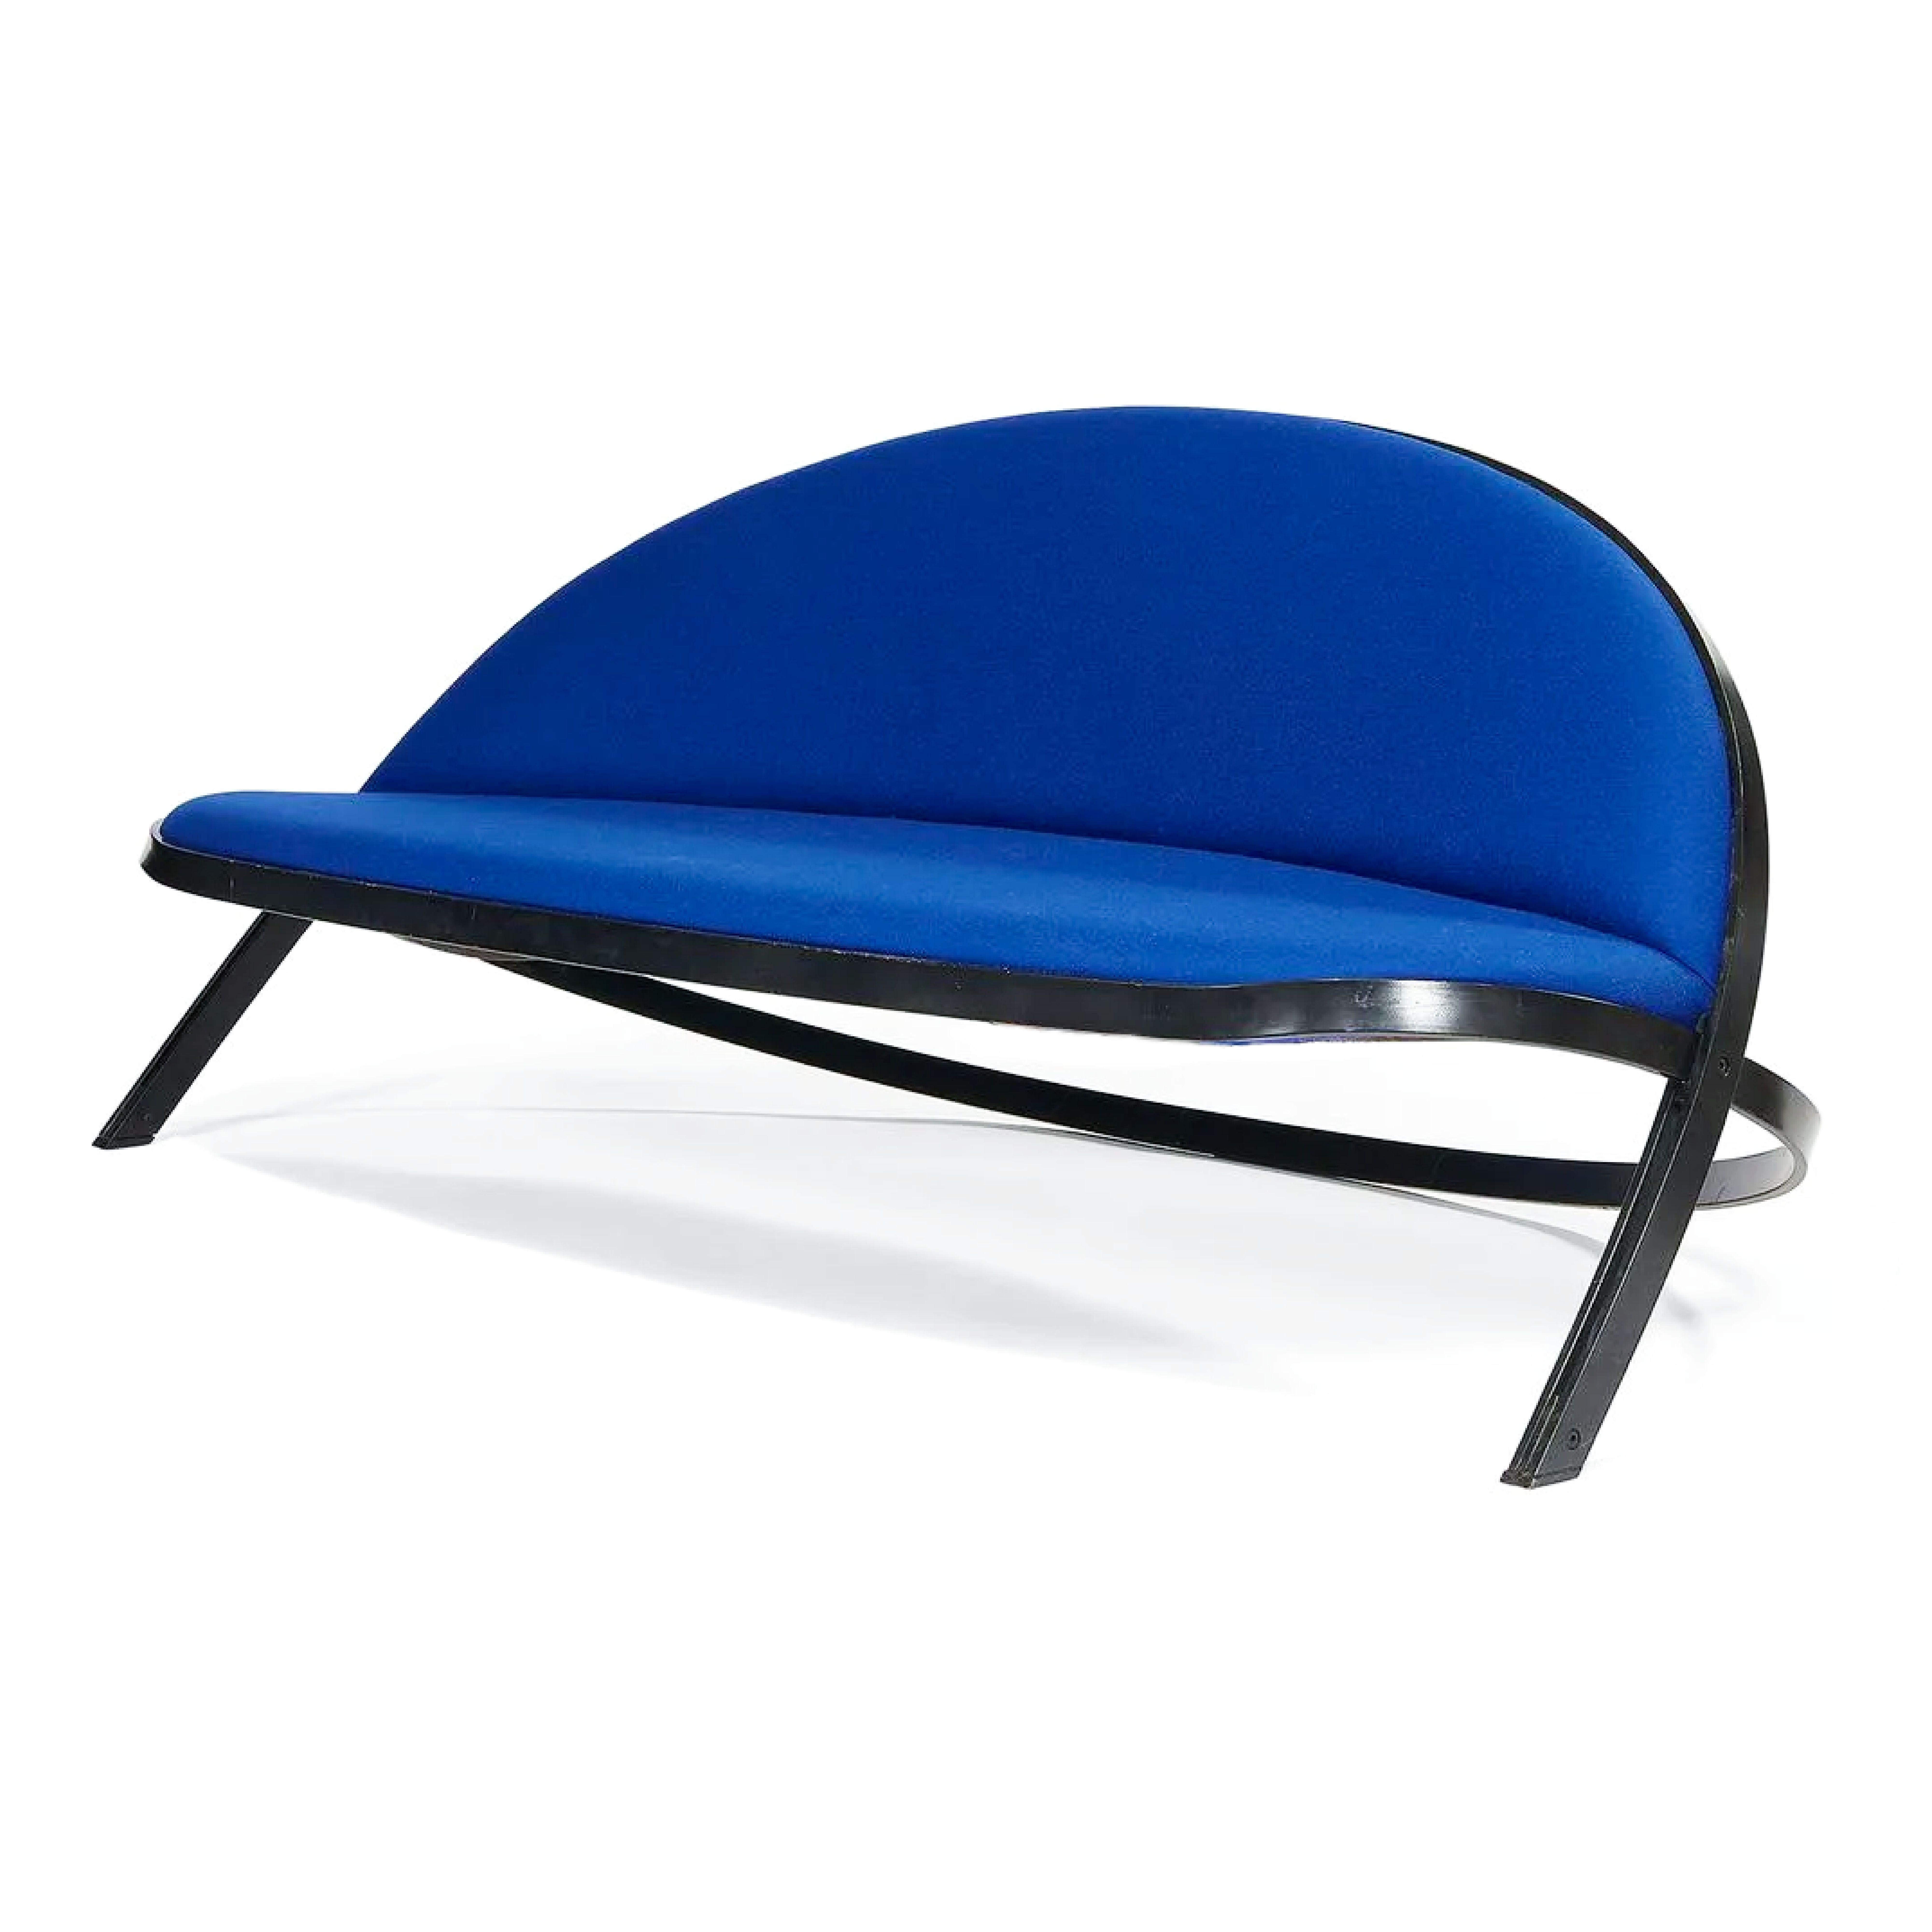 Saturn (Saturno) sofa by Gaston Rinaldi for Rima, Italy, 1957, recently reupholstered in luxurious Maharam Divina Melange Blue.
Rima was established in 1916 by Rinaldi’s father and based in Padova, Italy, the northern Italian city known for Giotto’s